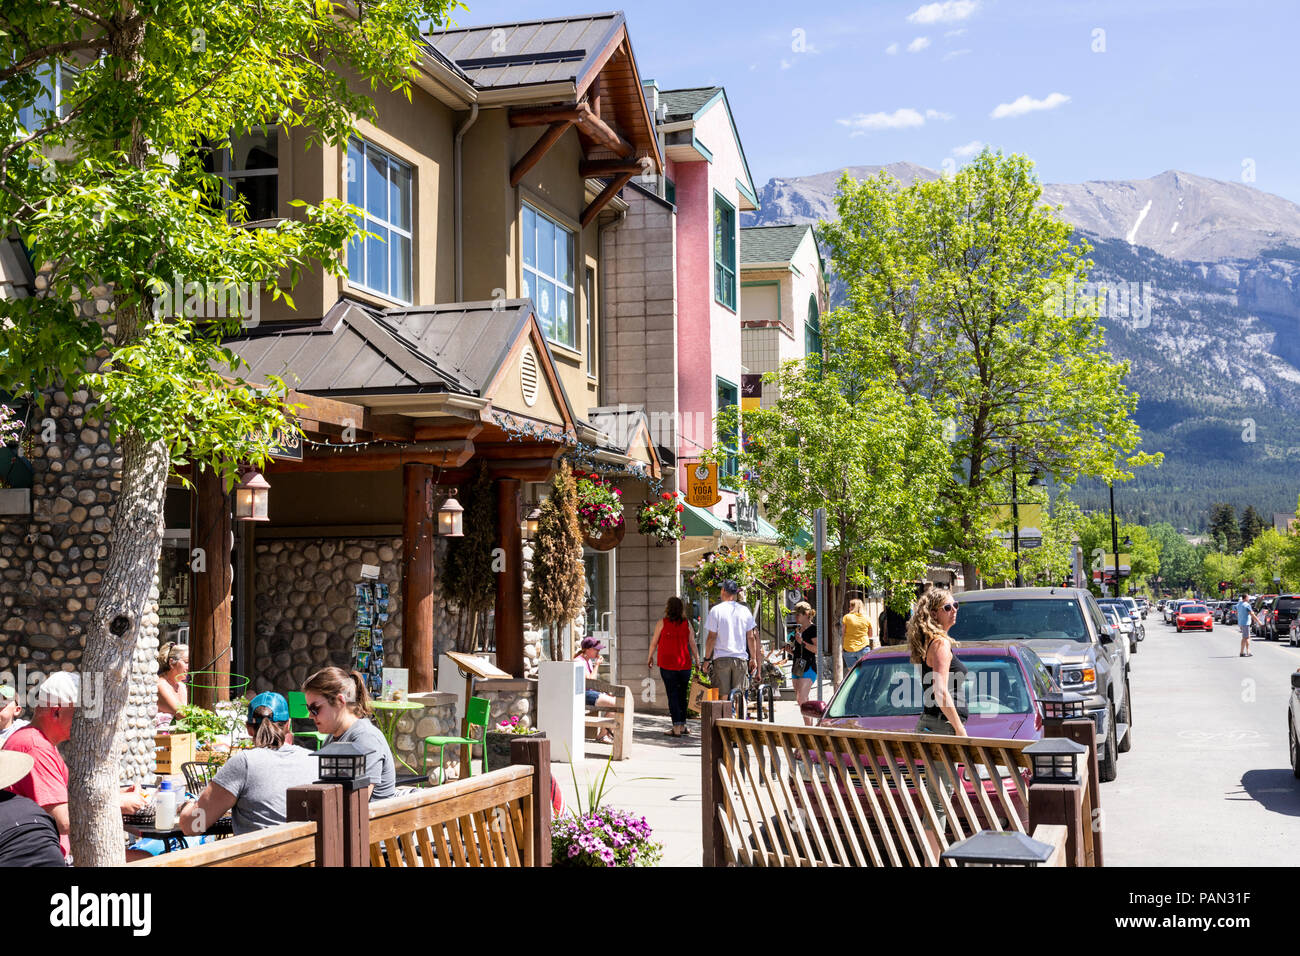 The town of Canmore on the western edge of the Rocky Mountains, Alberta, Canada Stock Photo